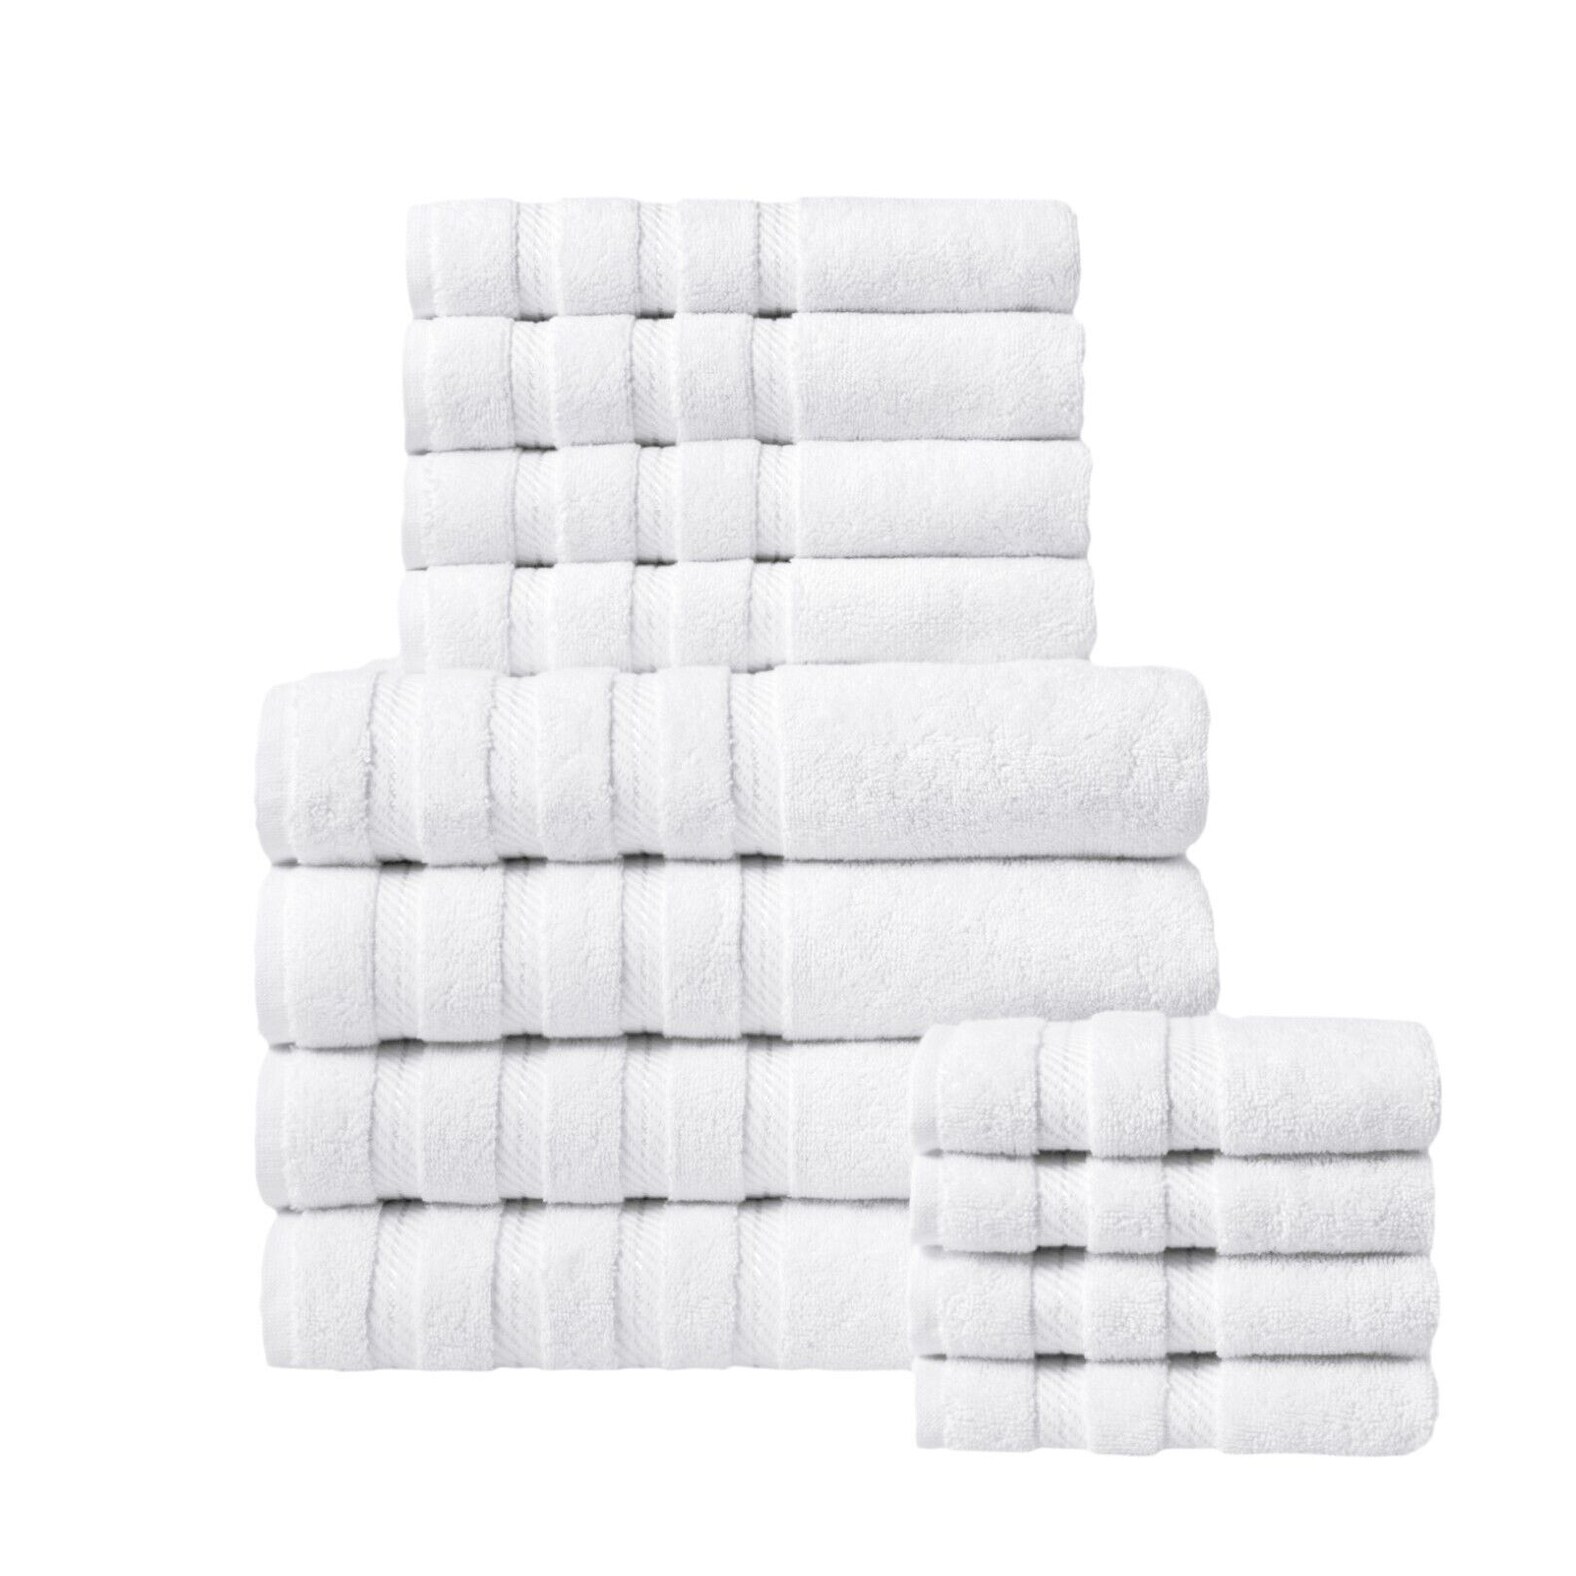 https://ak1.ostkcdn.com/images/products/is/images/direct/3806fb2dee65b8e0772036c0f15a39e5d8844f61/Antalya-Hotel-Collection-Turkish-Cotton-Bathroom-Towel-12-Pc-Family-Set.jpg